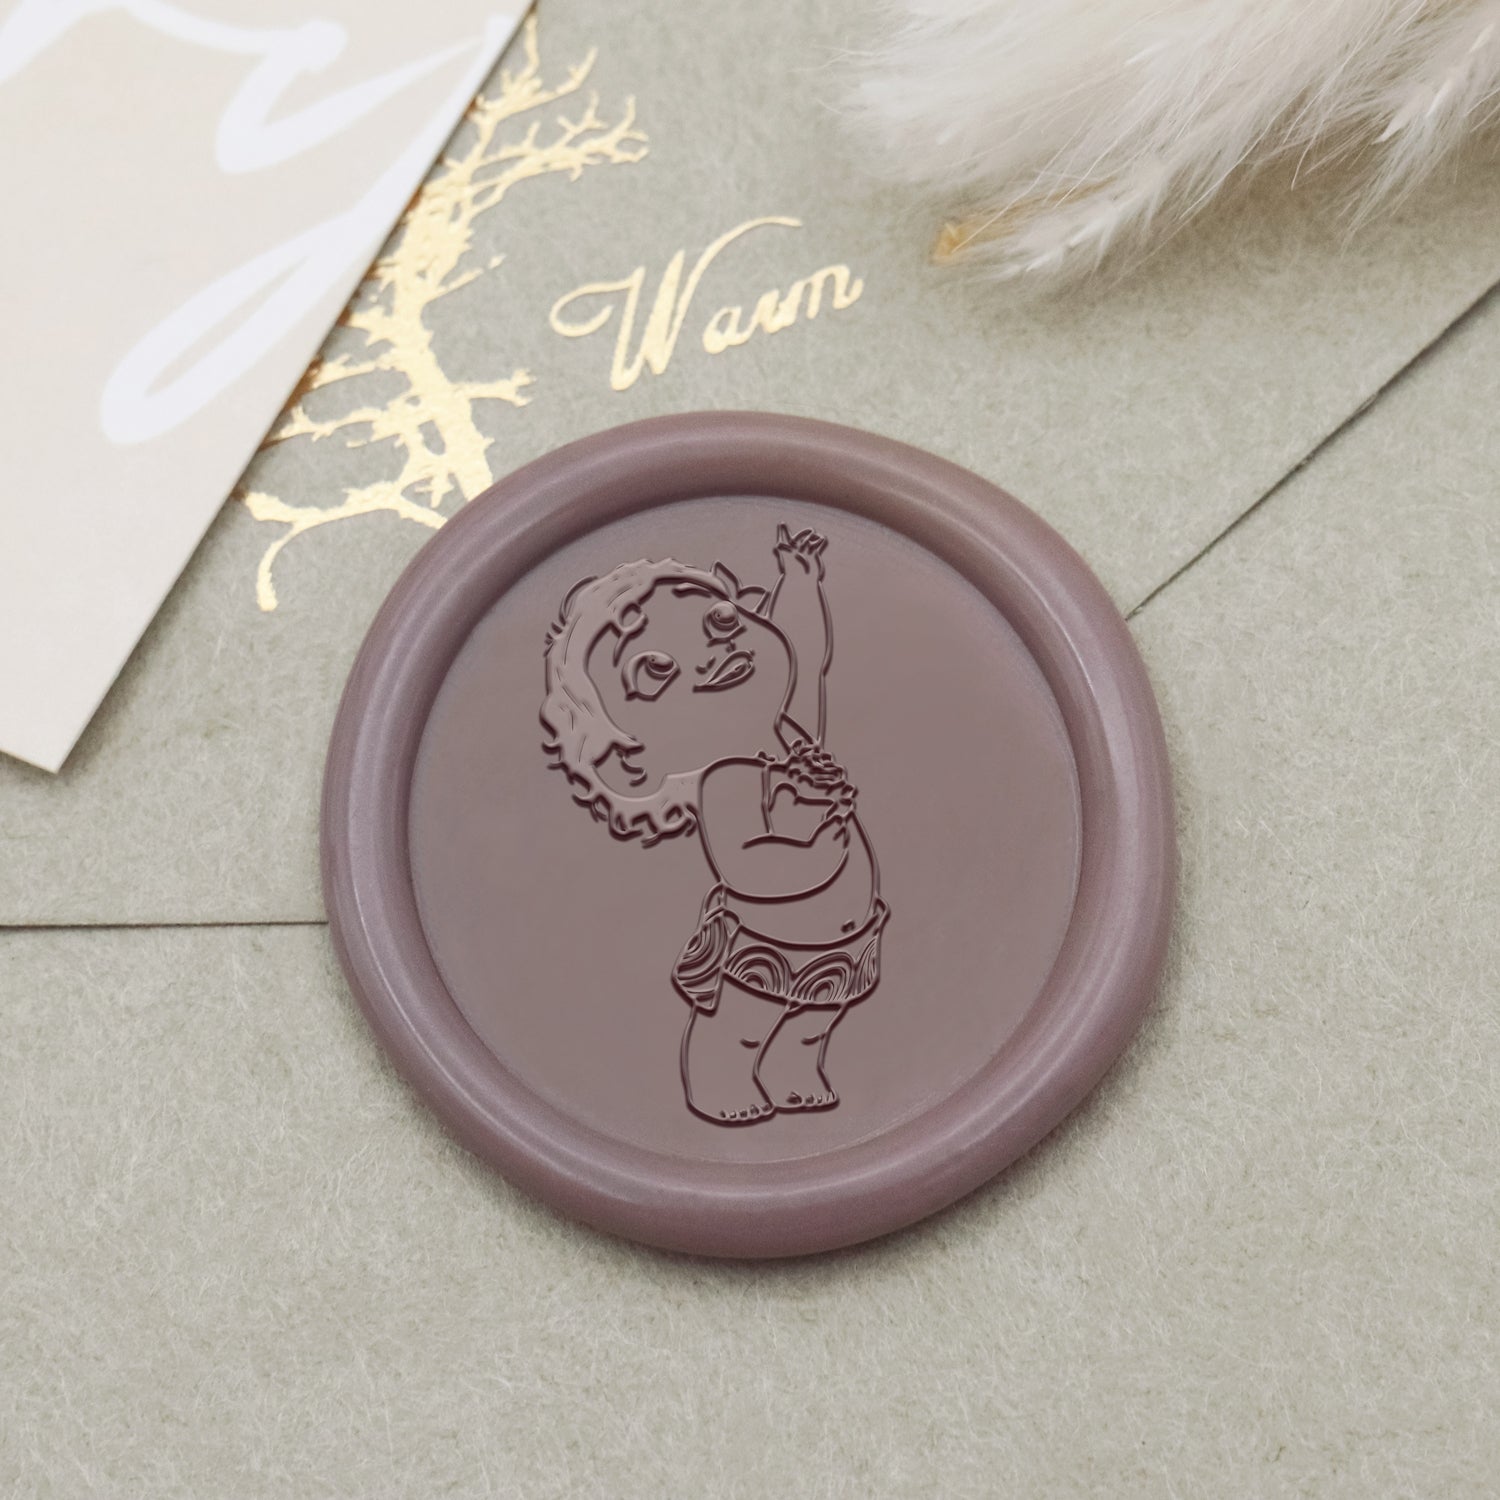 Animated Film Fairytale Character Wax Seal Stamp - 23 1